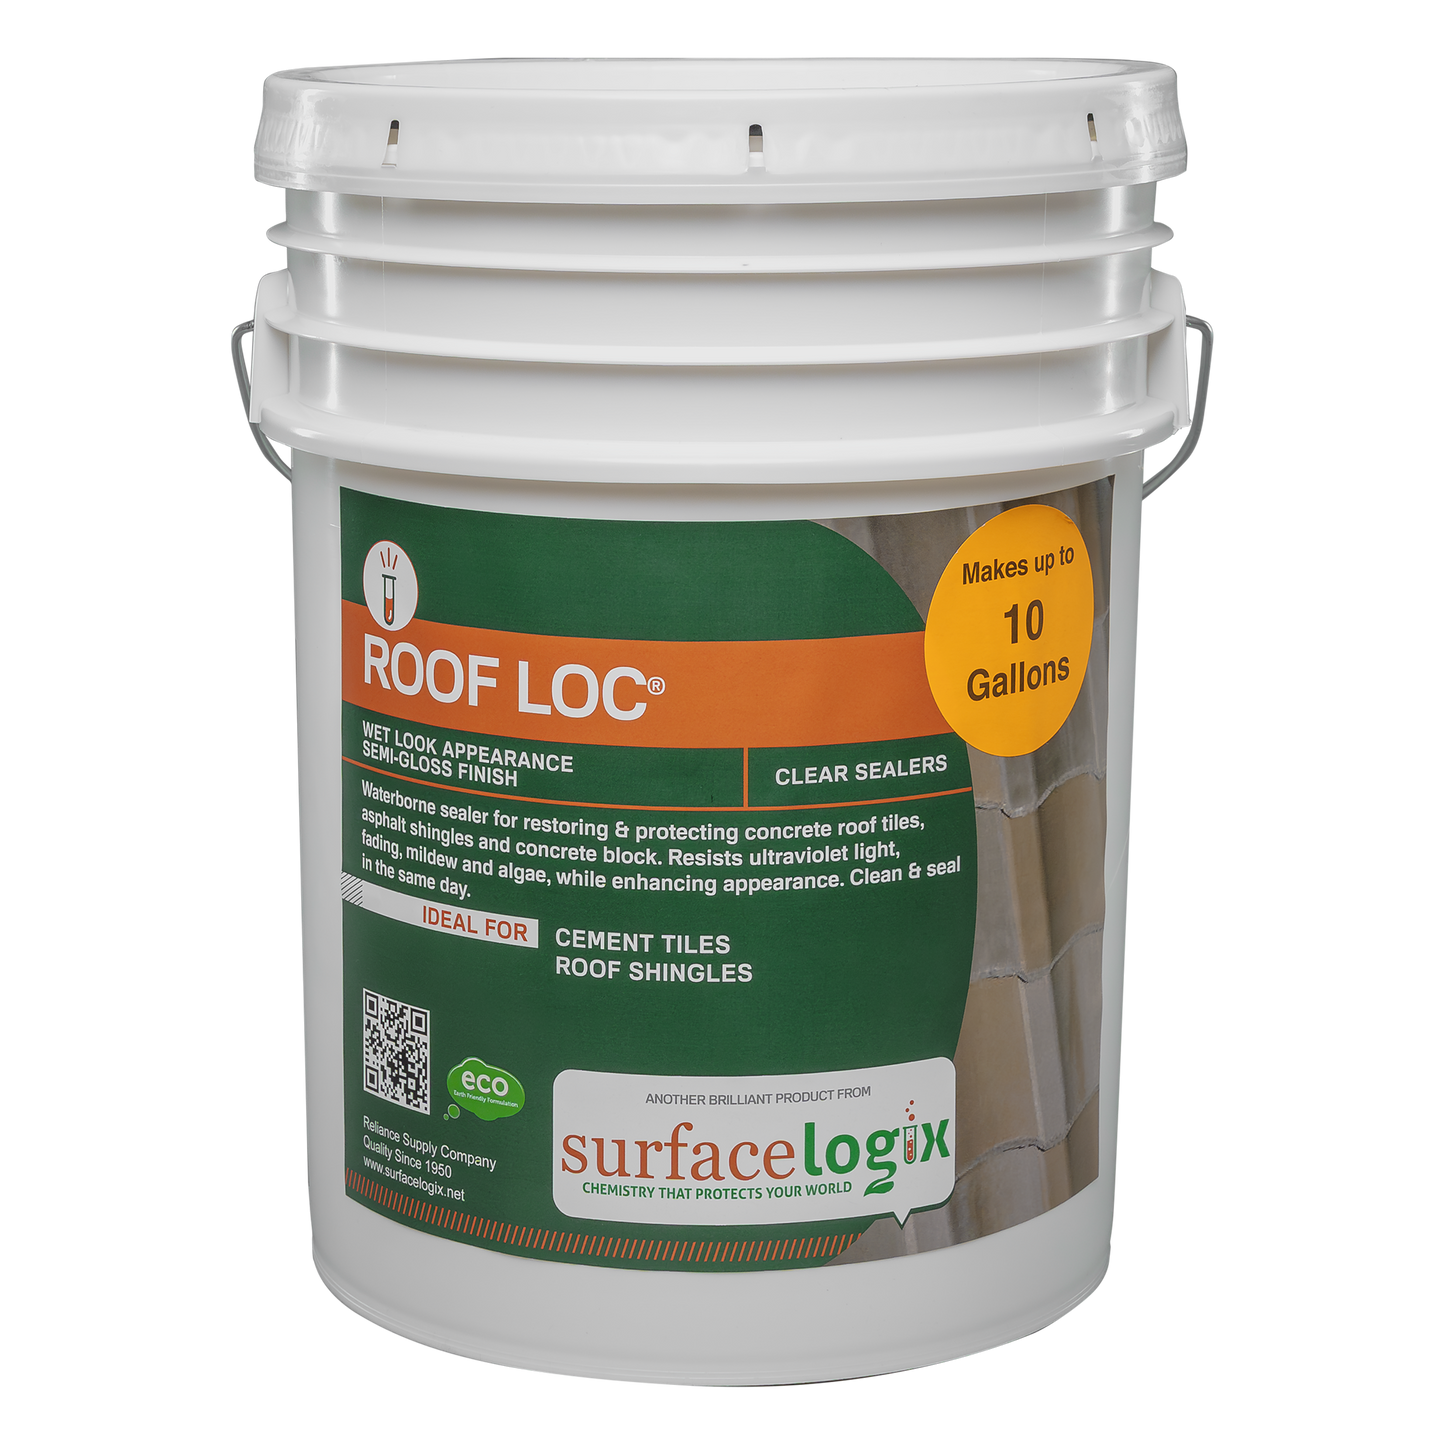 Roof Loc is water-based protection for concrete/cement roof tiles/shingles. Resists ultraviolet light, fading, mildew, algae, etc. to keep your roof looking great longer between cleanings! Clean and seal in the same day, even on damp surfaces. Bring back the beauty and protect your roof with eco-friendly Roof Loc!